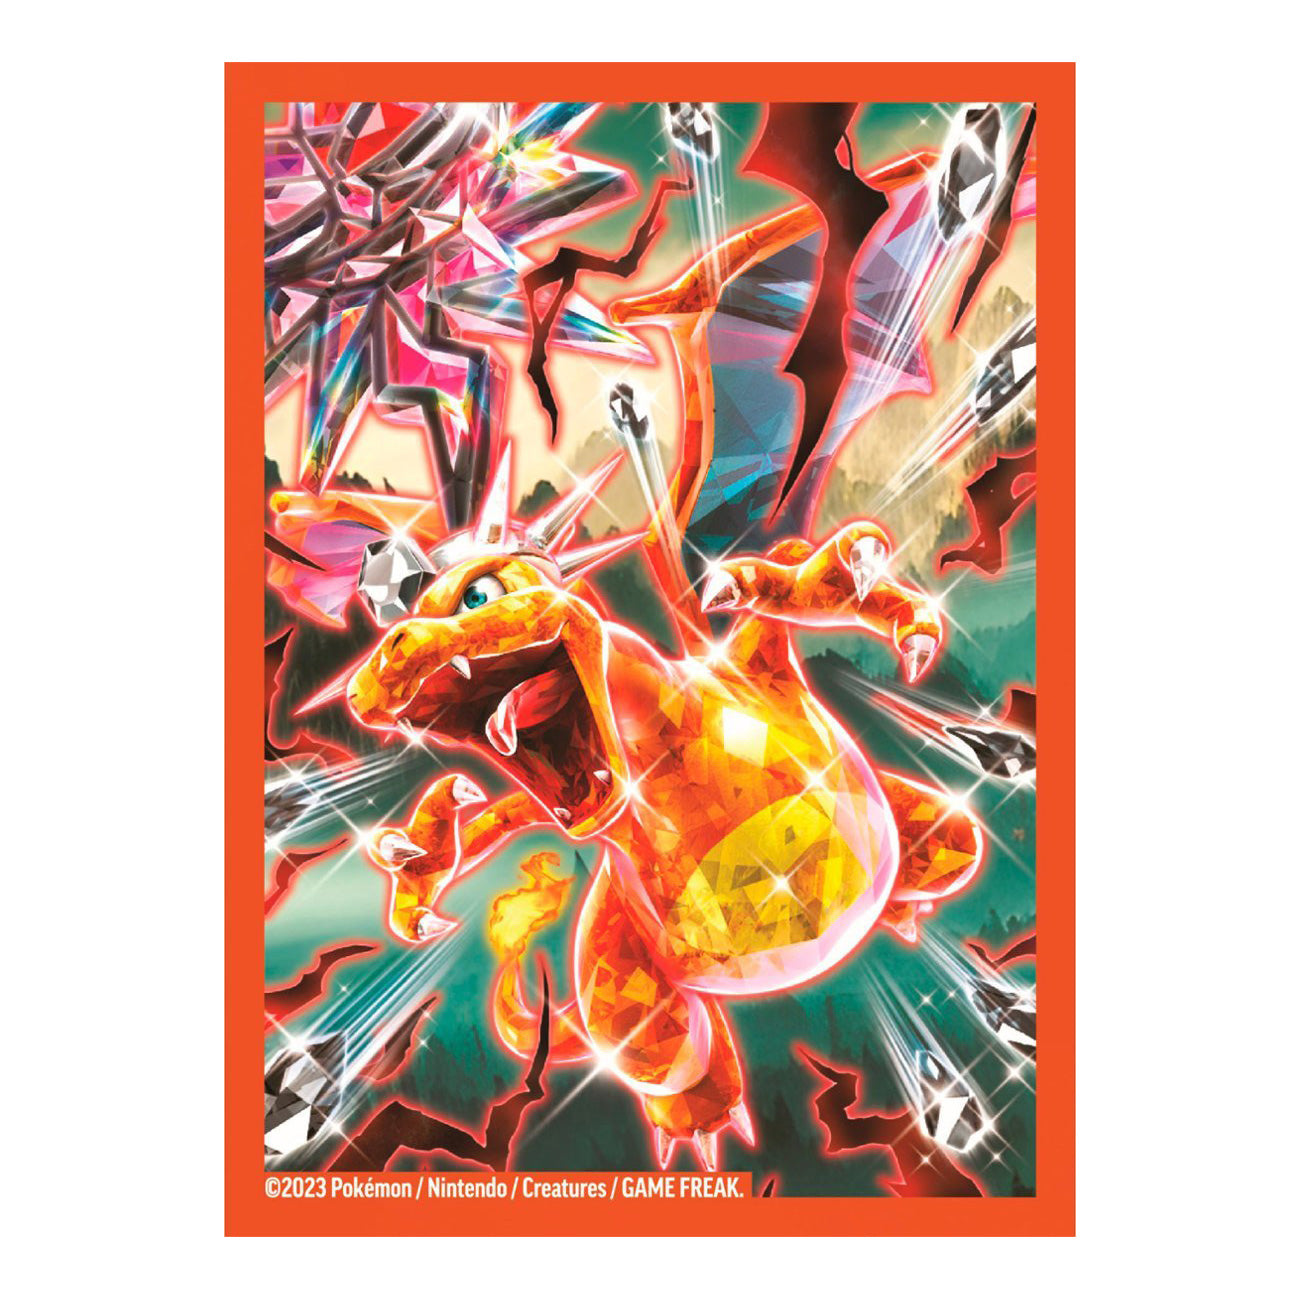 Sleeve art for the Charizard EX Premium Collection